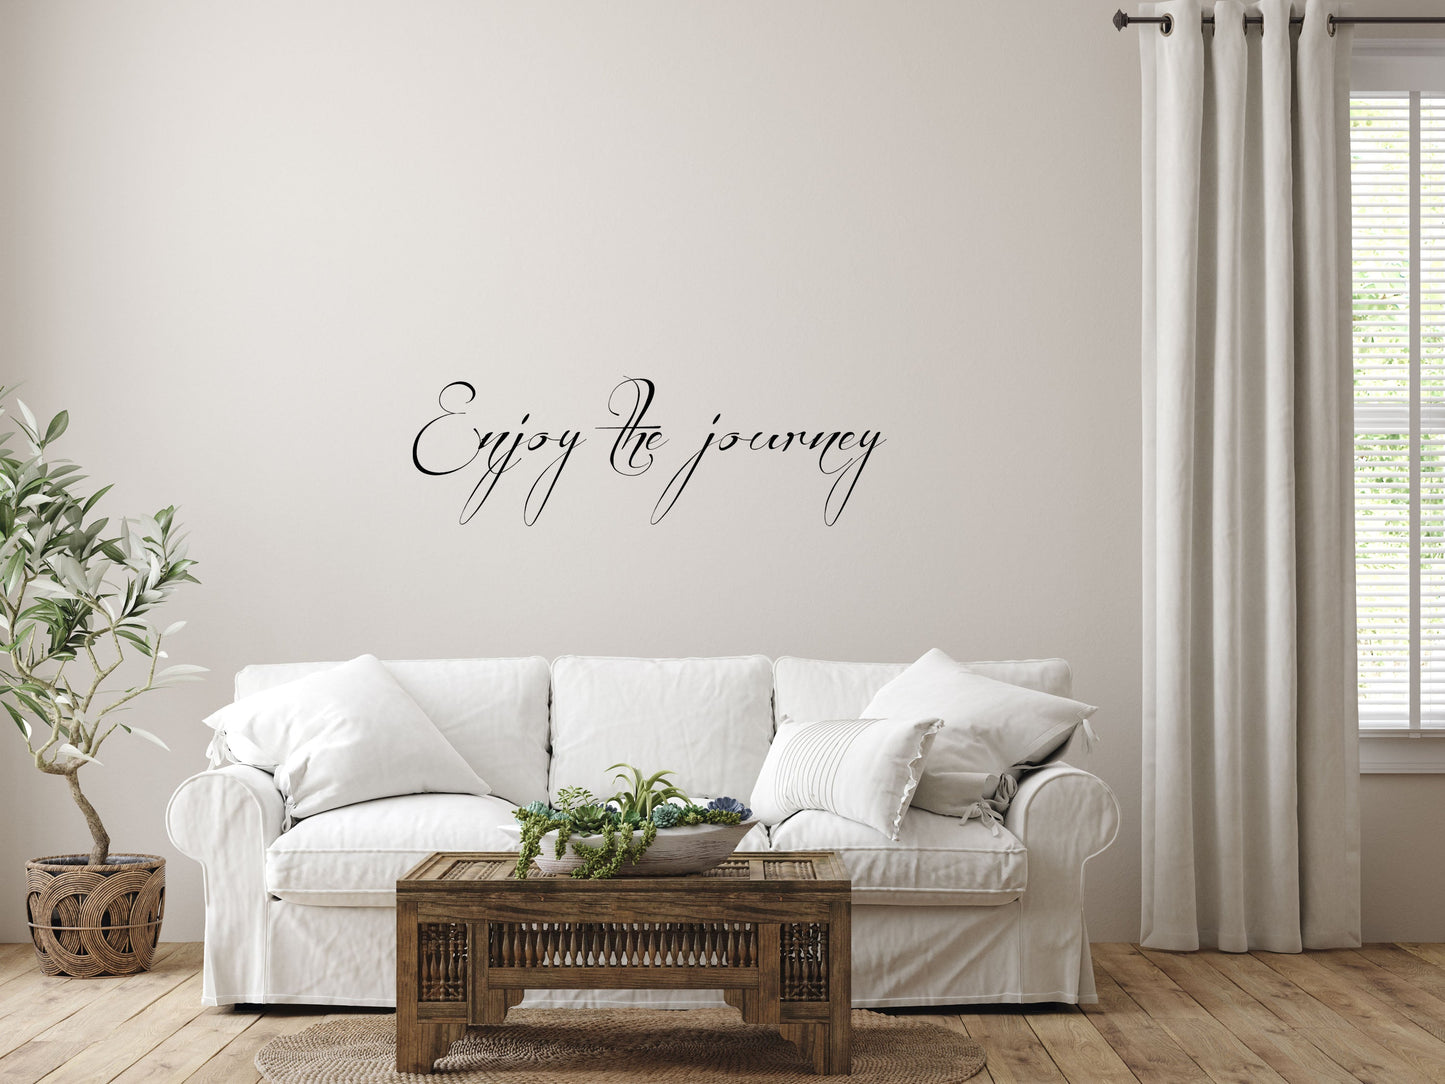 Enjoy The Journey - Inspirational Wall Decals Vinyl Wall Decal Inspirational Wall Signs 